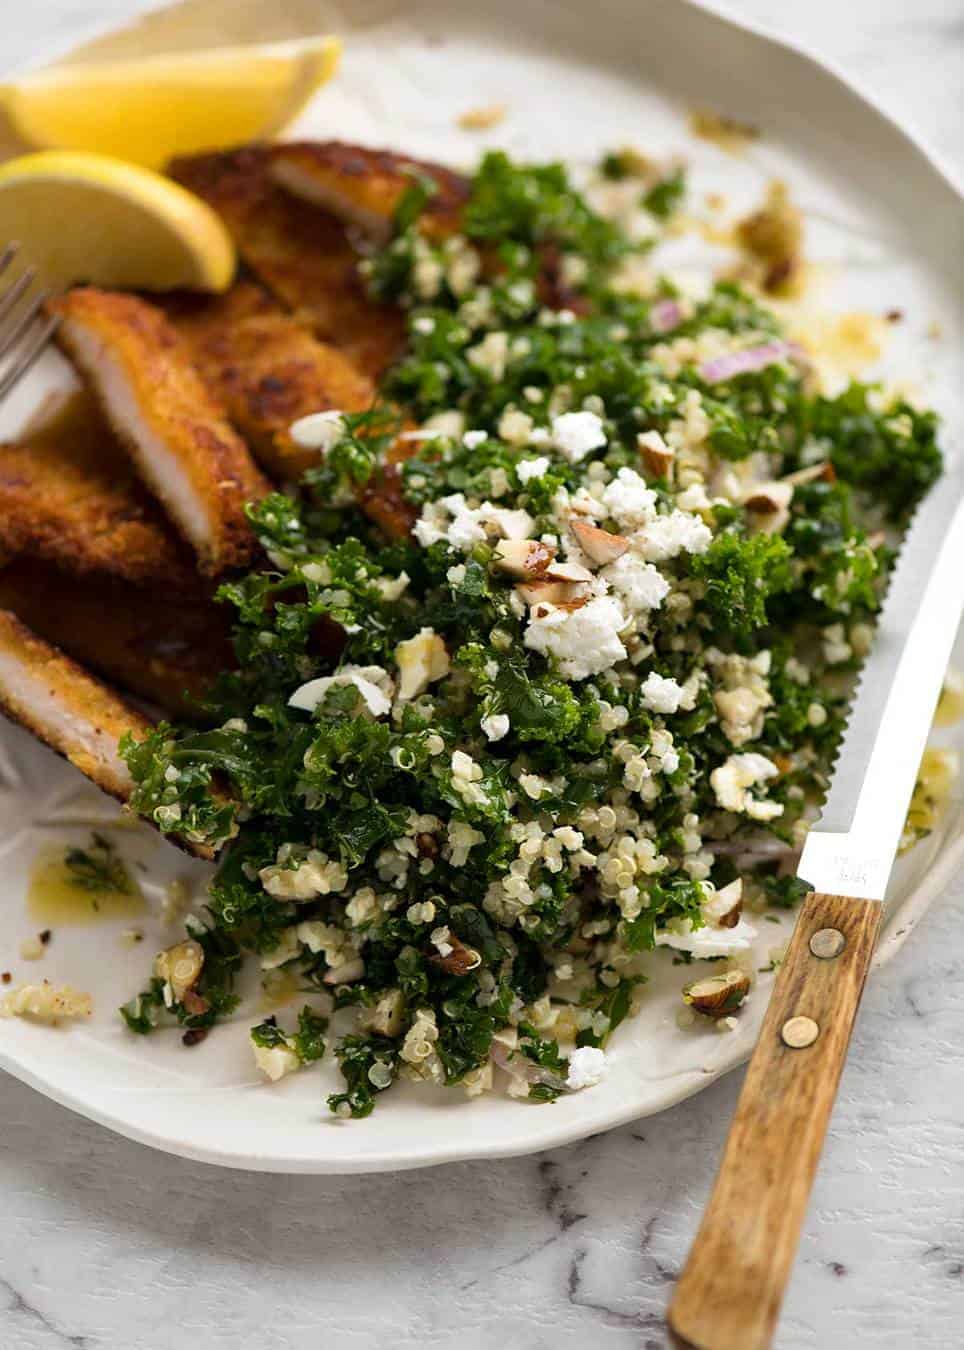 Kale and Quinoa Salad om a rustic white plate with cut up chicken schnitzel on the side, ready to be eaten.